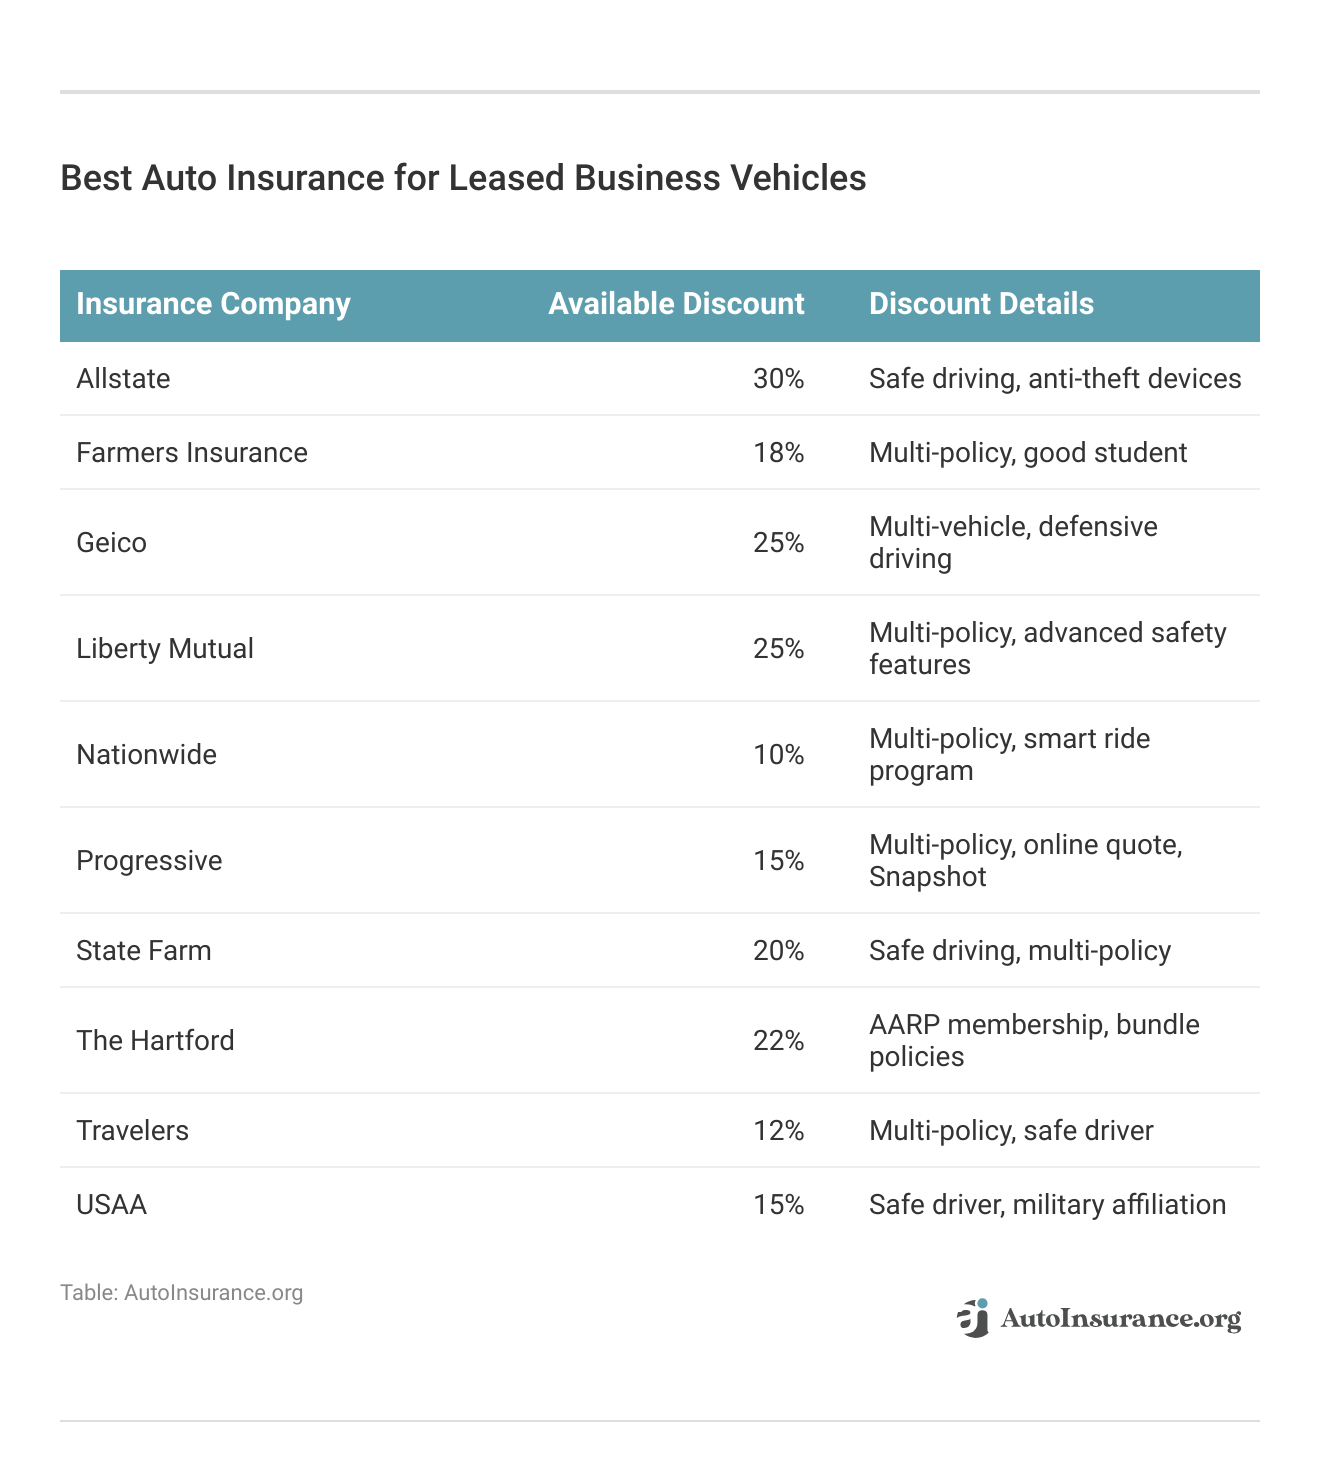 <h3>Best Auto Insurance for Leased Business Vehicles</h3>